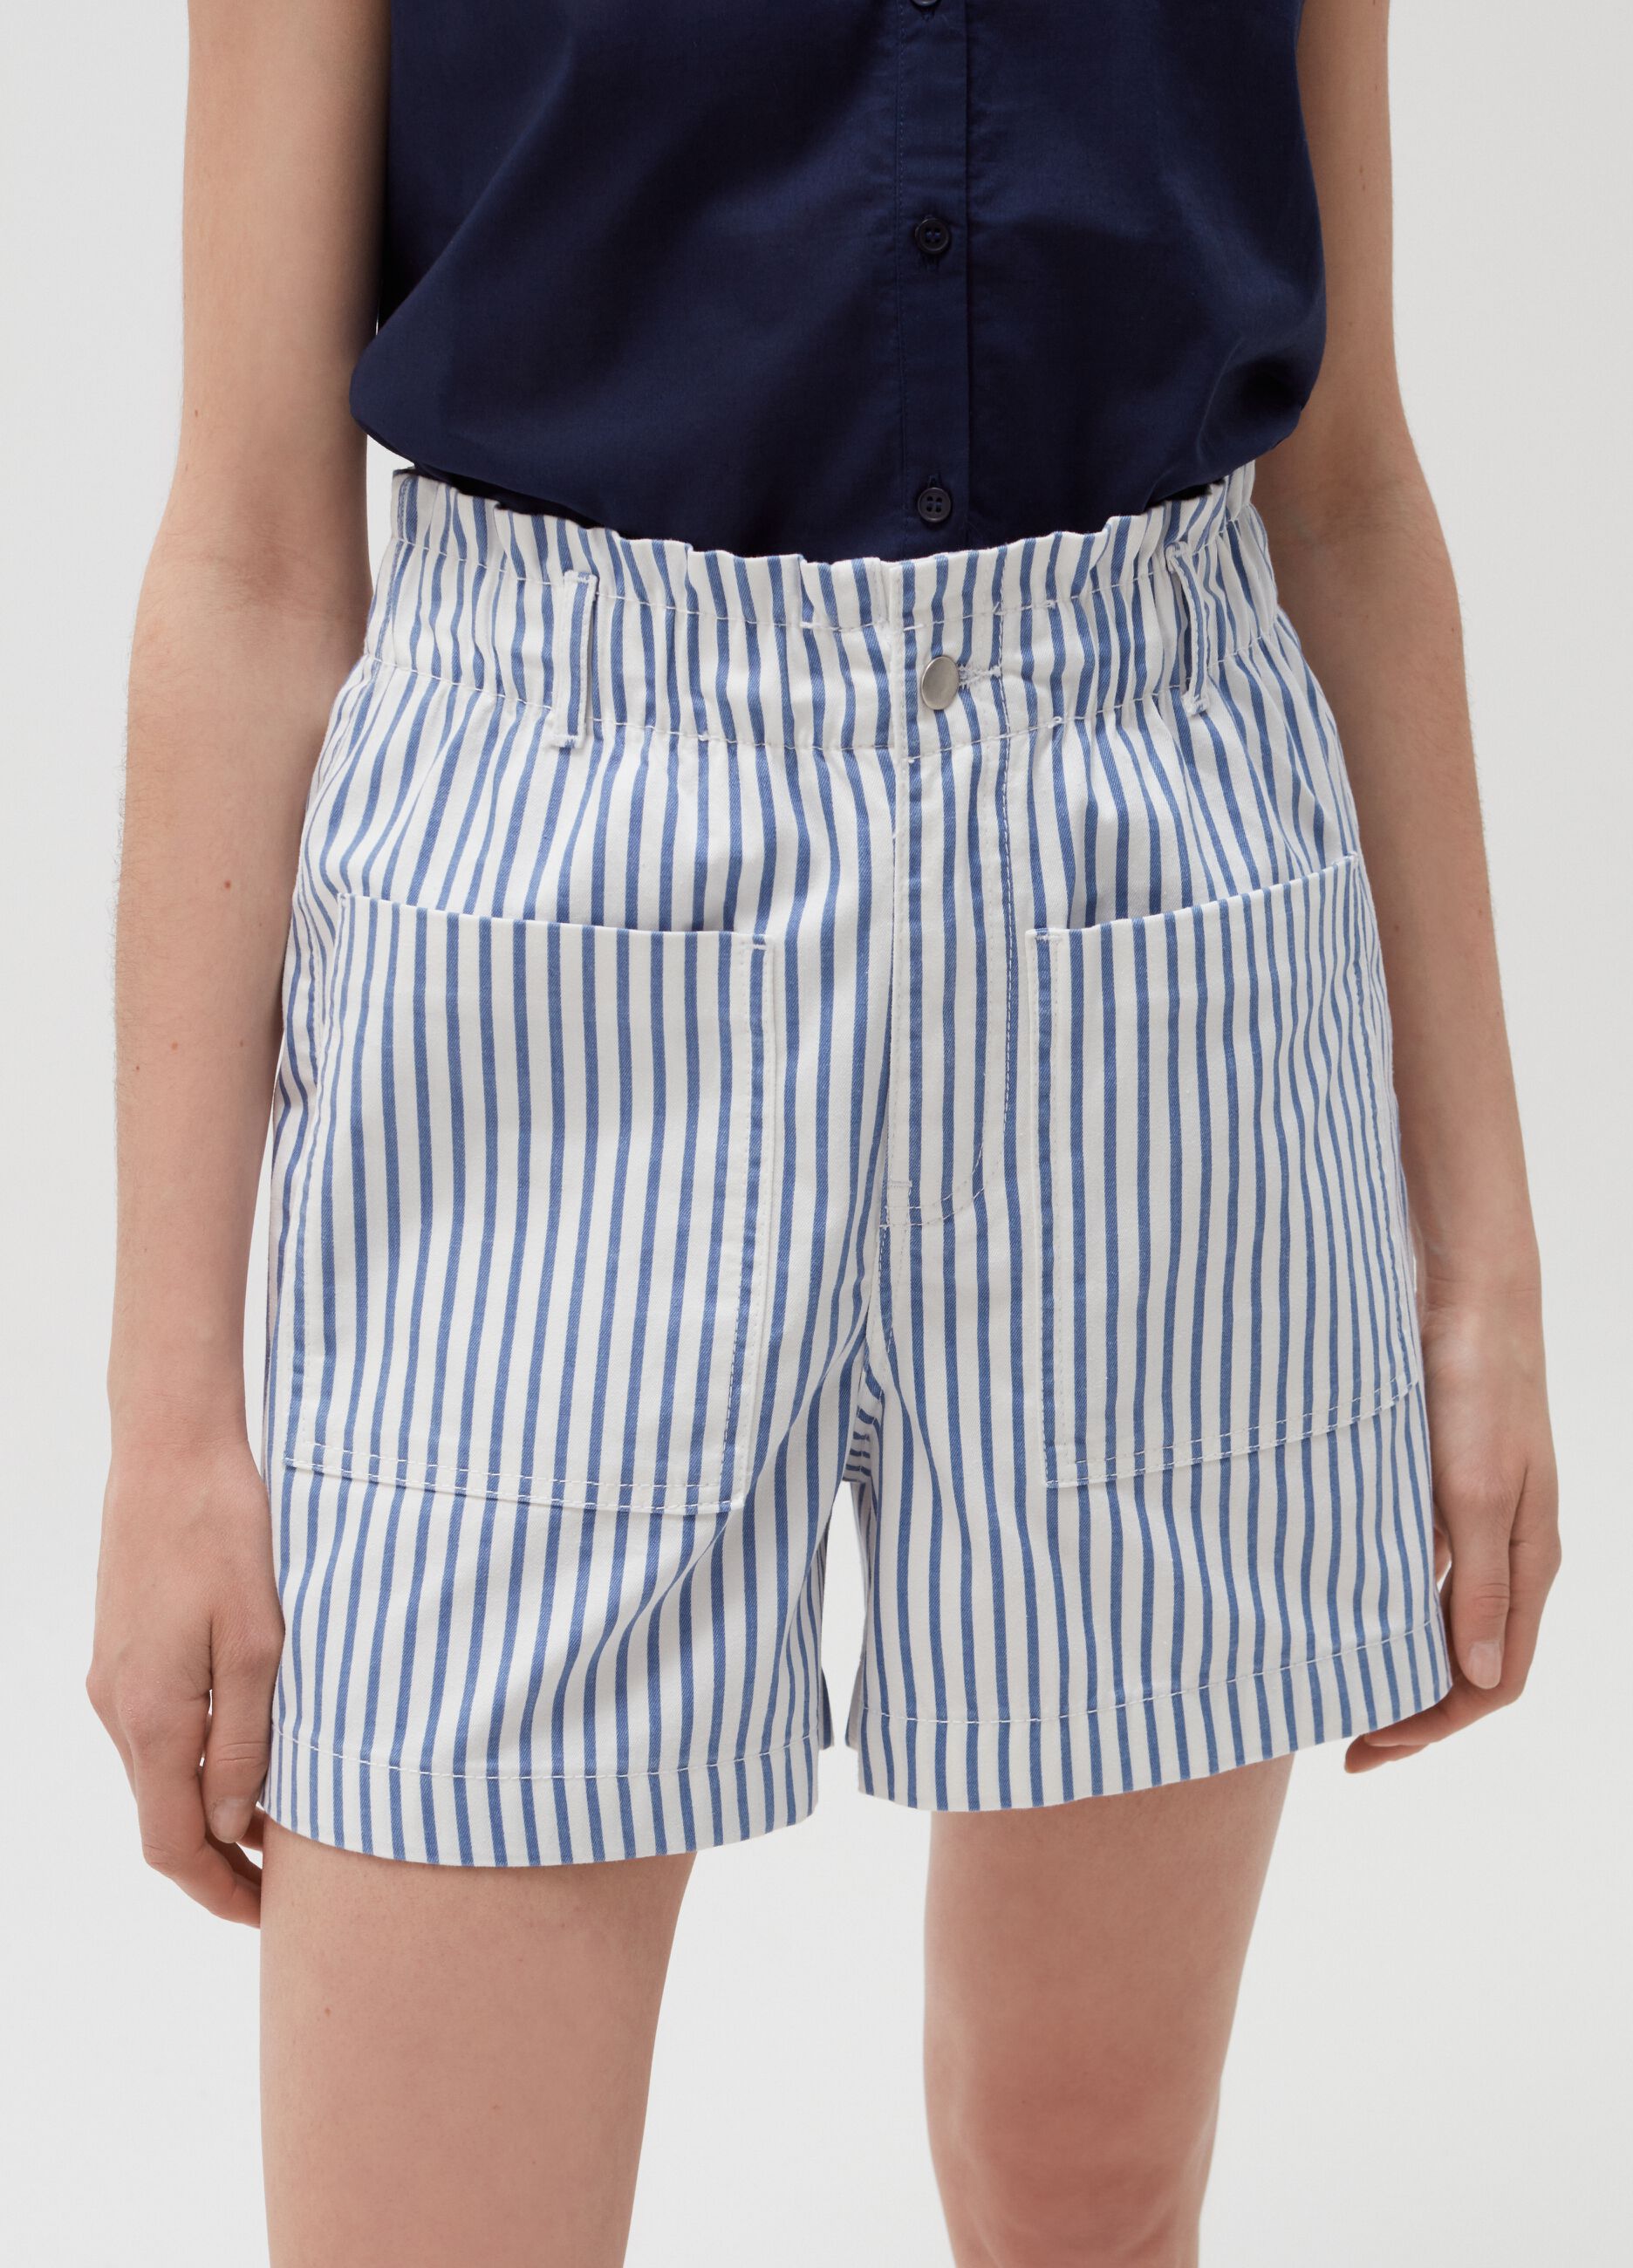 Cotton shorts with high waist